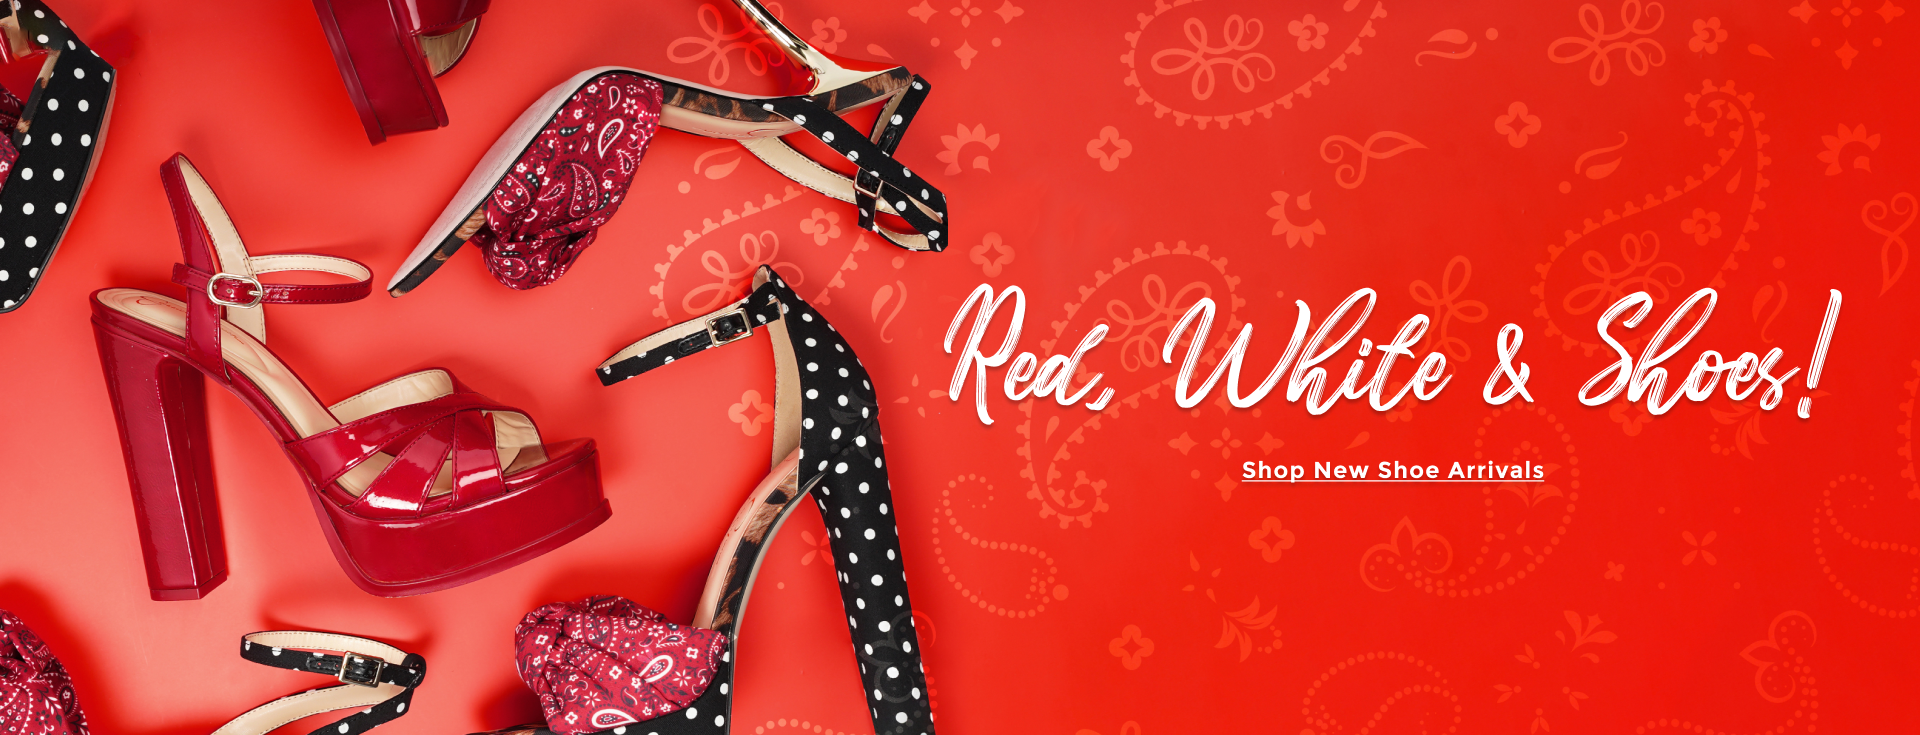 Red, White & Shoes Shop New Shoe Arrivals